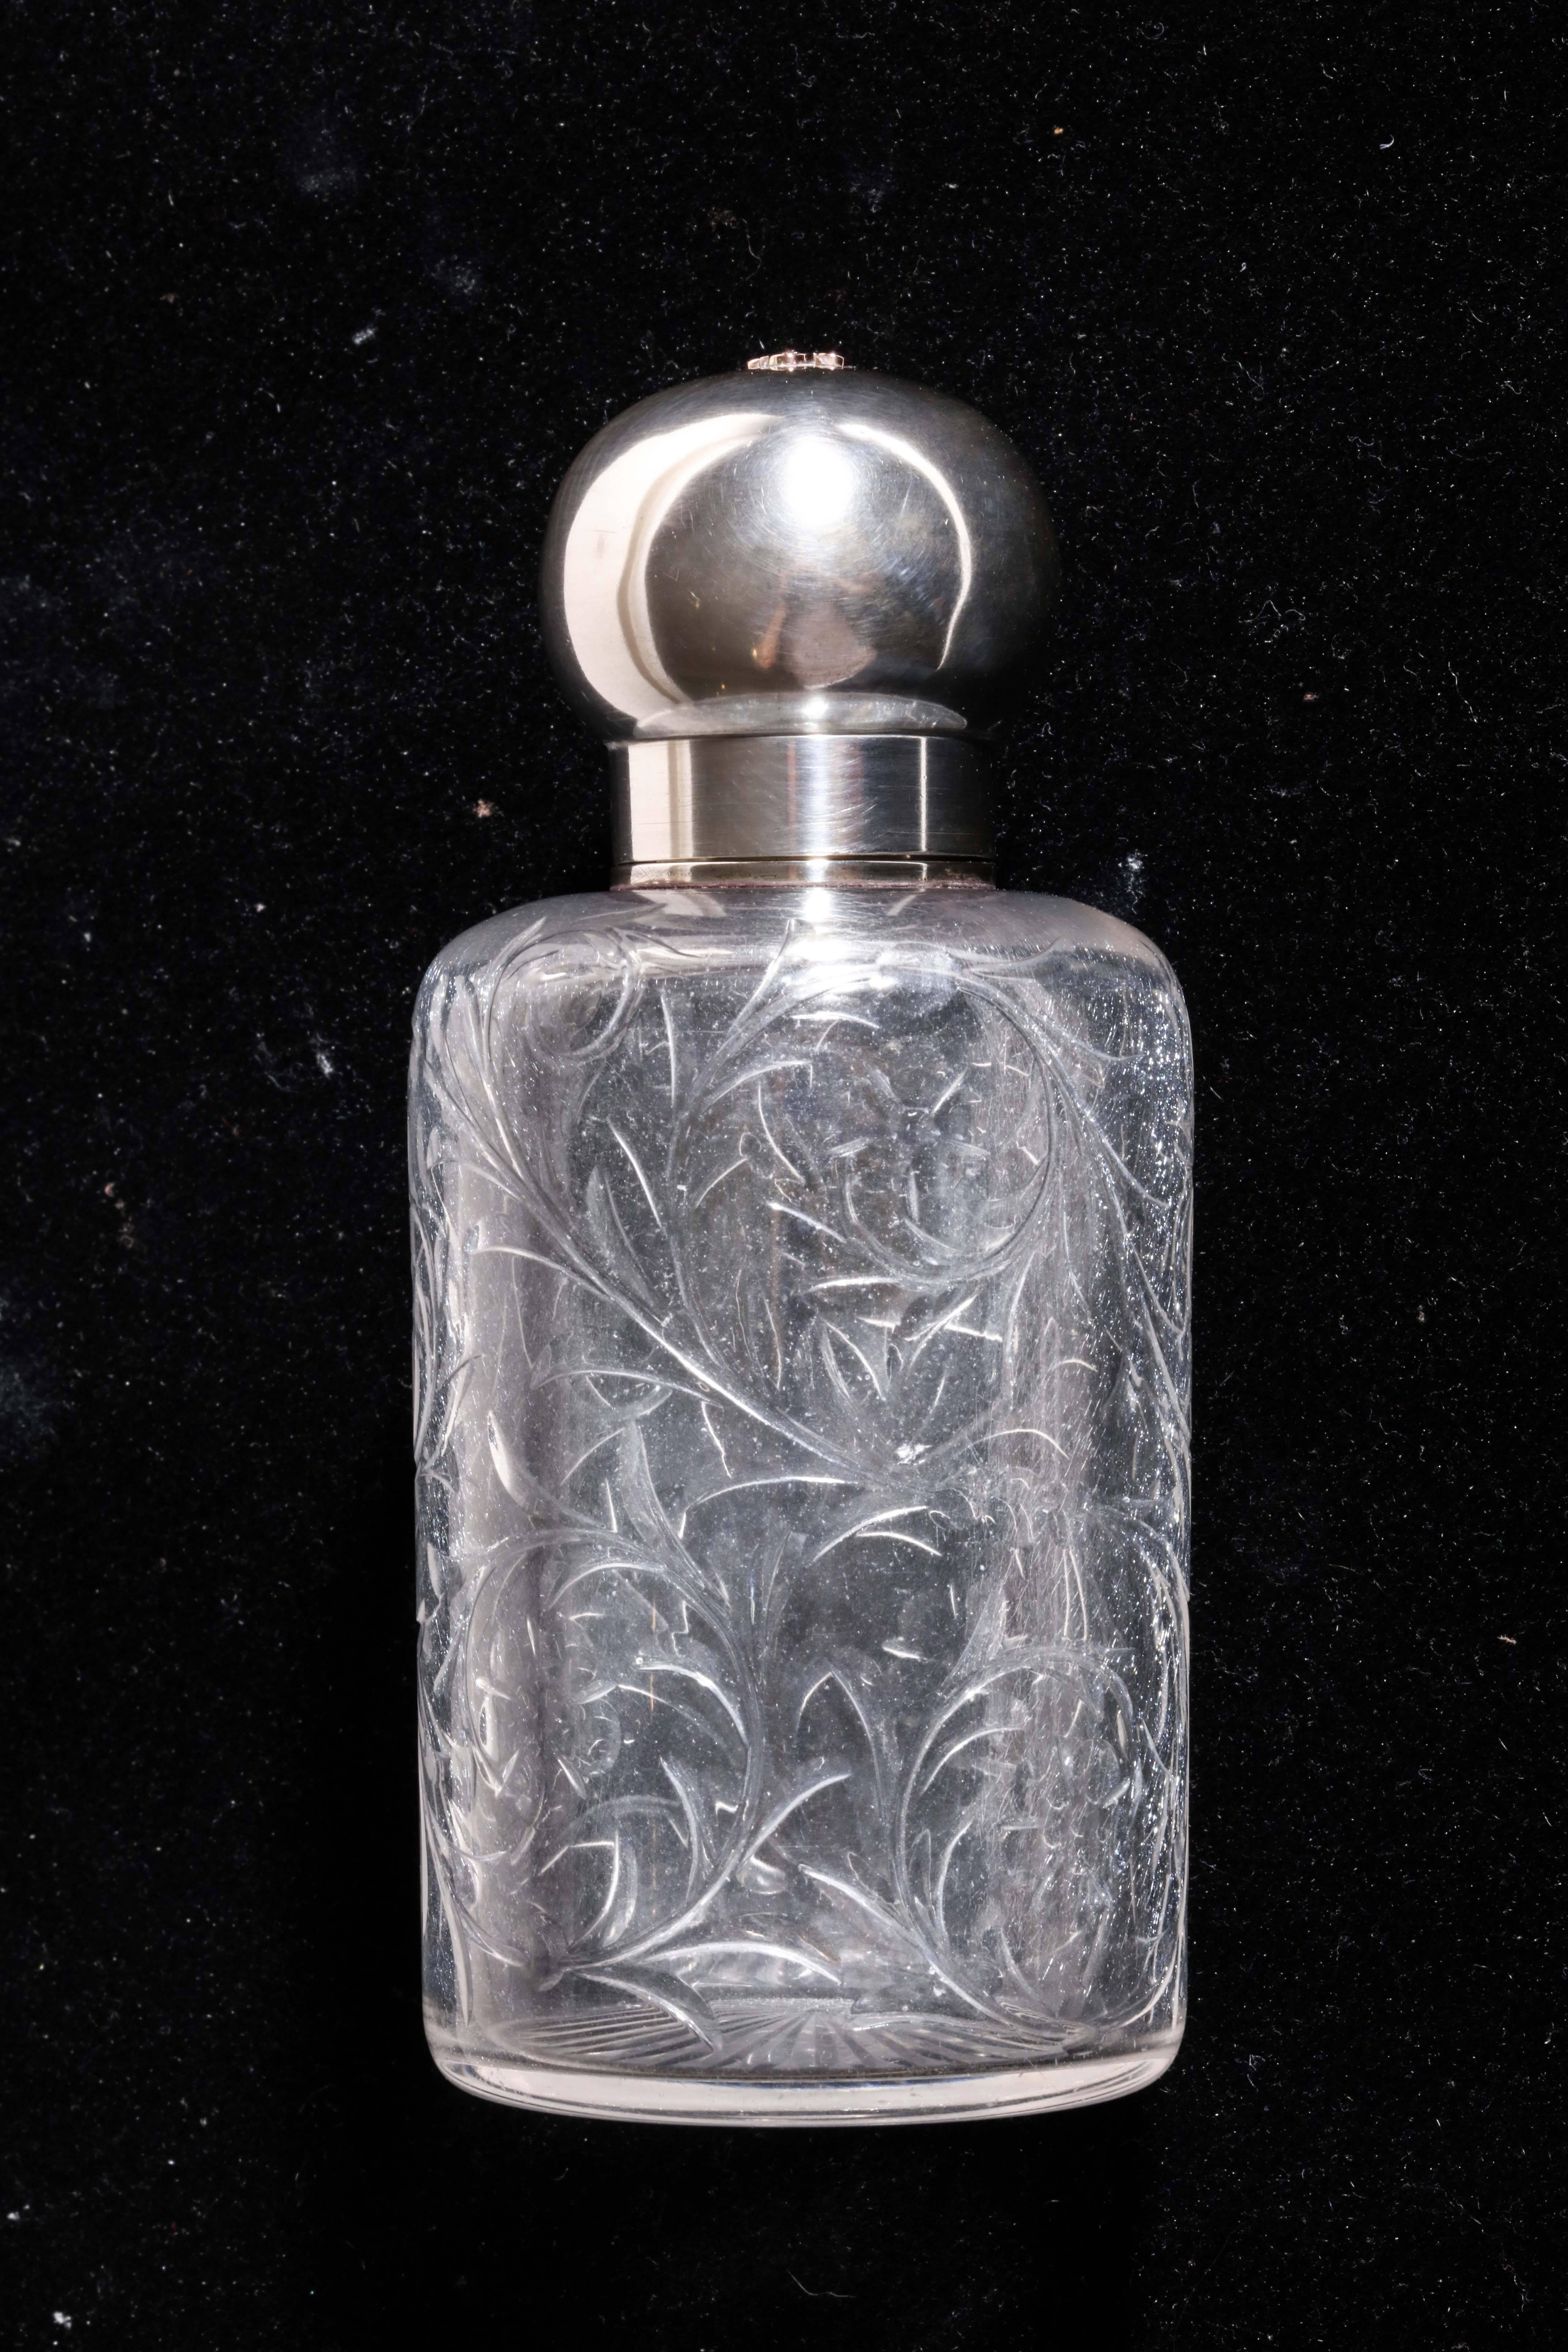 Crystal scent bottle with etched design of flowers and sterling silver top. AJ monogram in gold attached to top.
Impressed with Minerve for 950 silver/ G KELLER / Keller poincon GK head of Mercury.
   